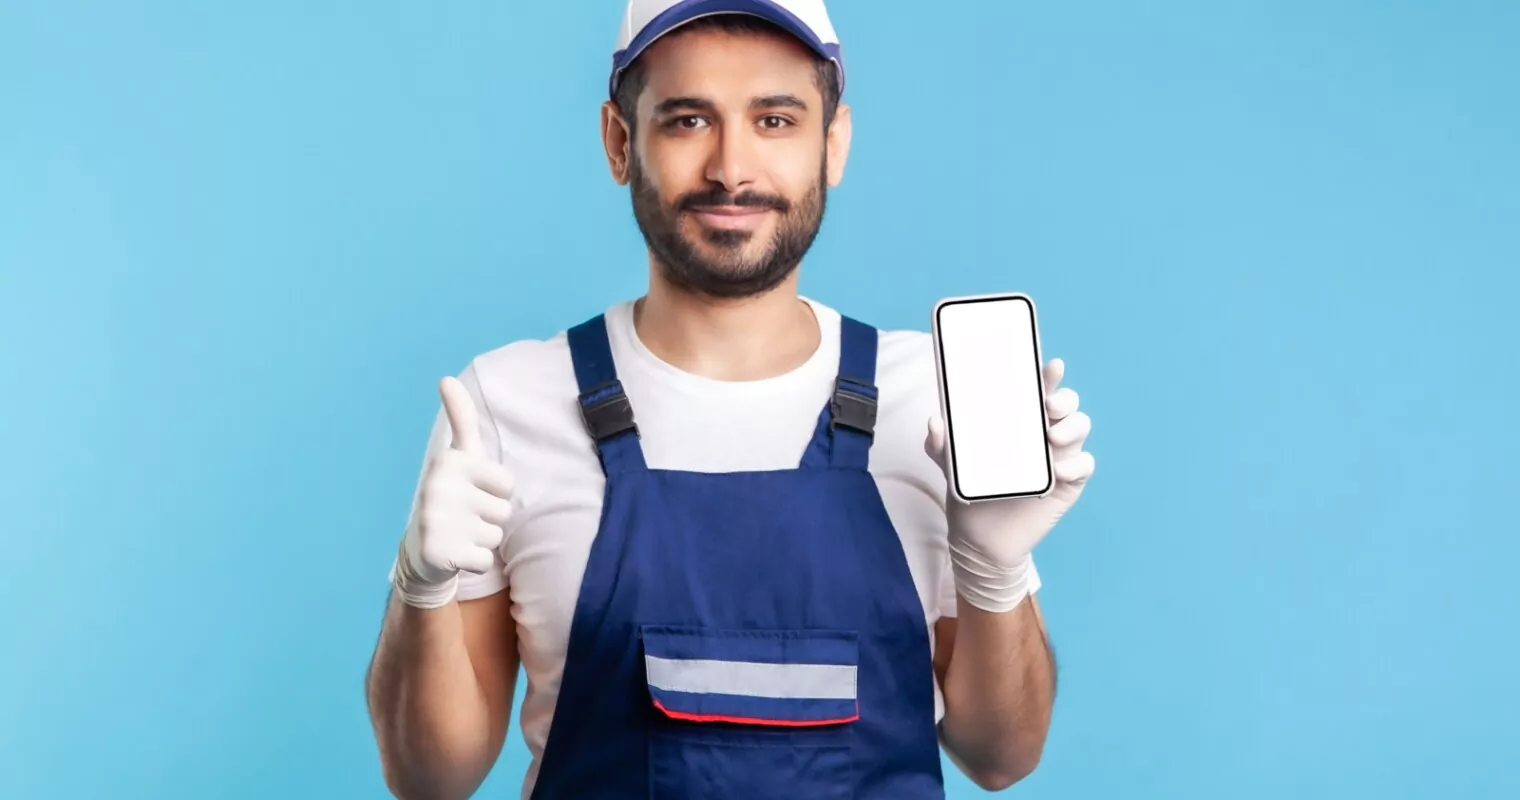 A plumber in action, holding a mobile phone, illustrating the importance of Local SEO for plumbing businesses.